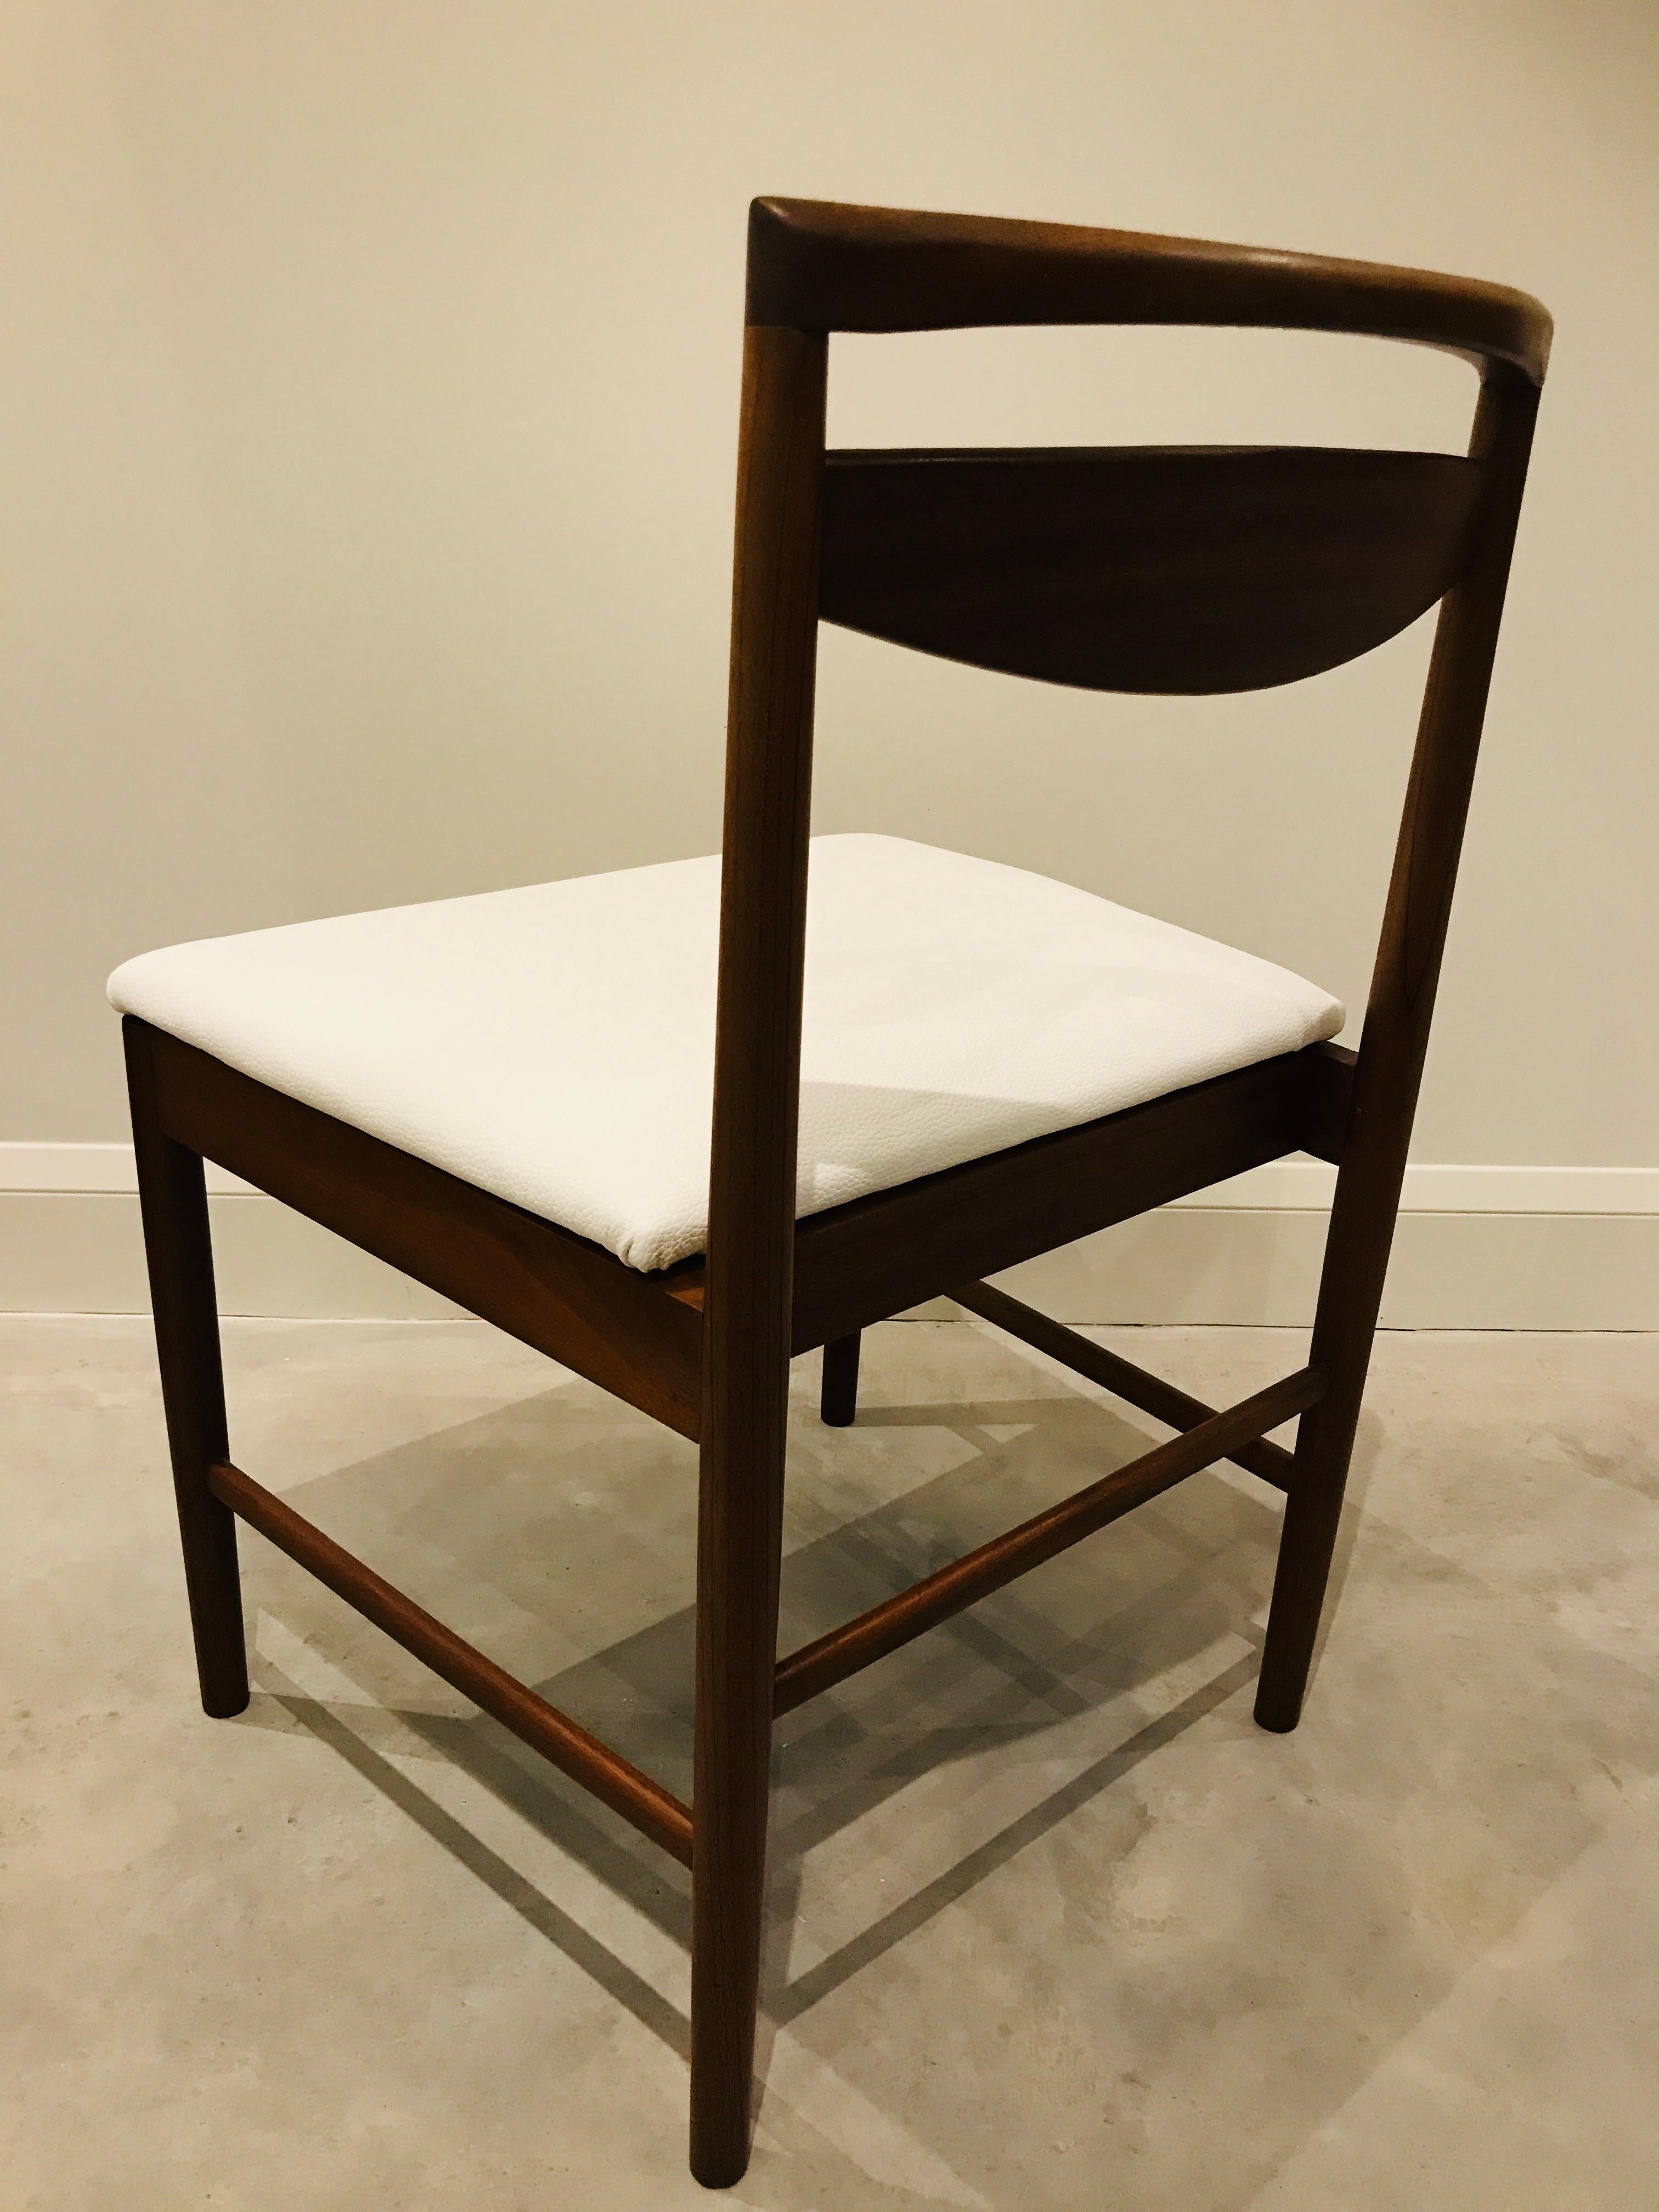 1970 Vintage Teak McIntosh Retro Dining Chairs Upholstered in White Leather For Sale 6